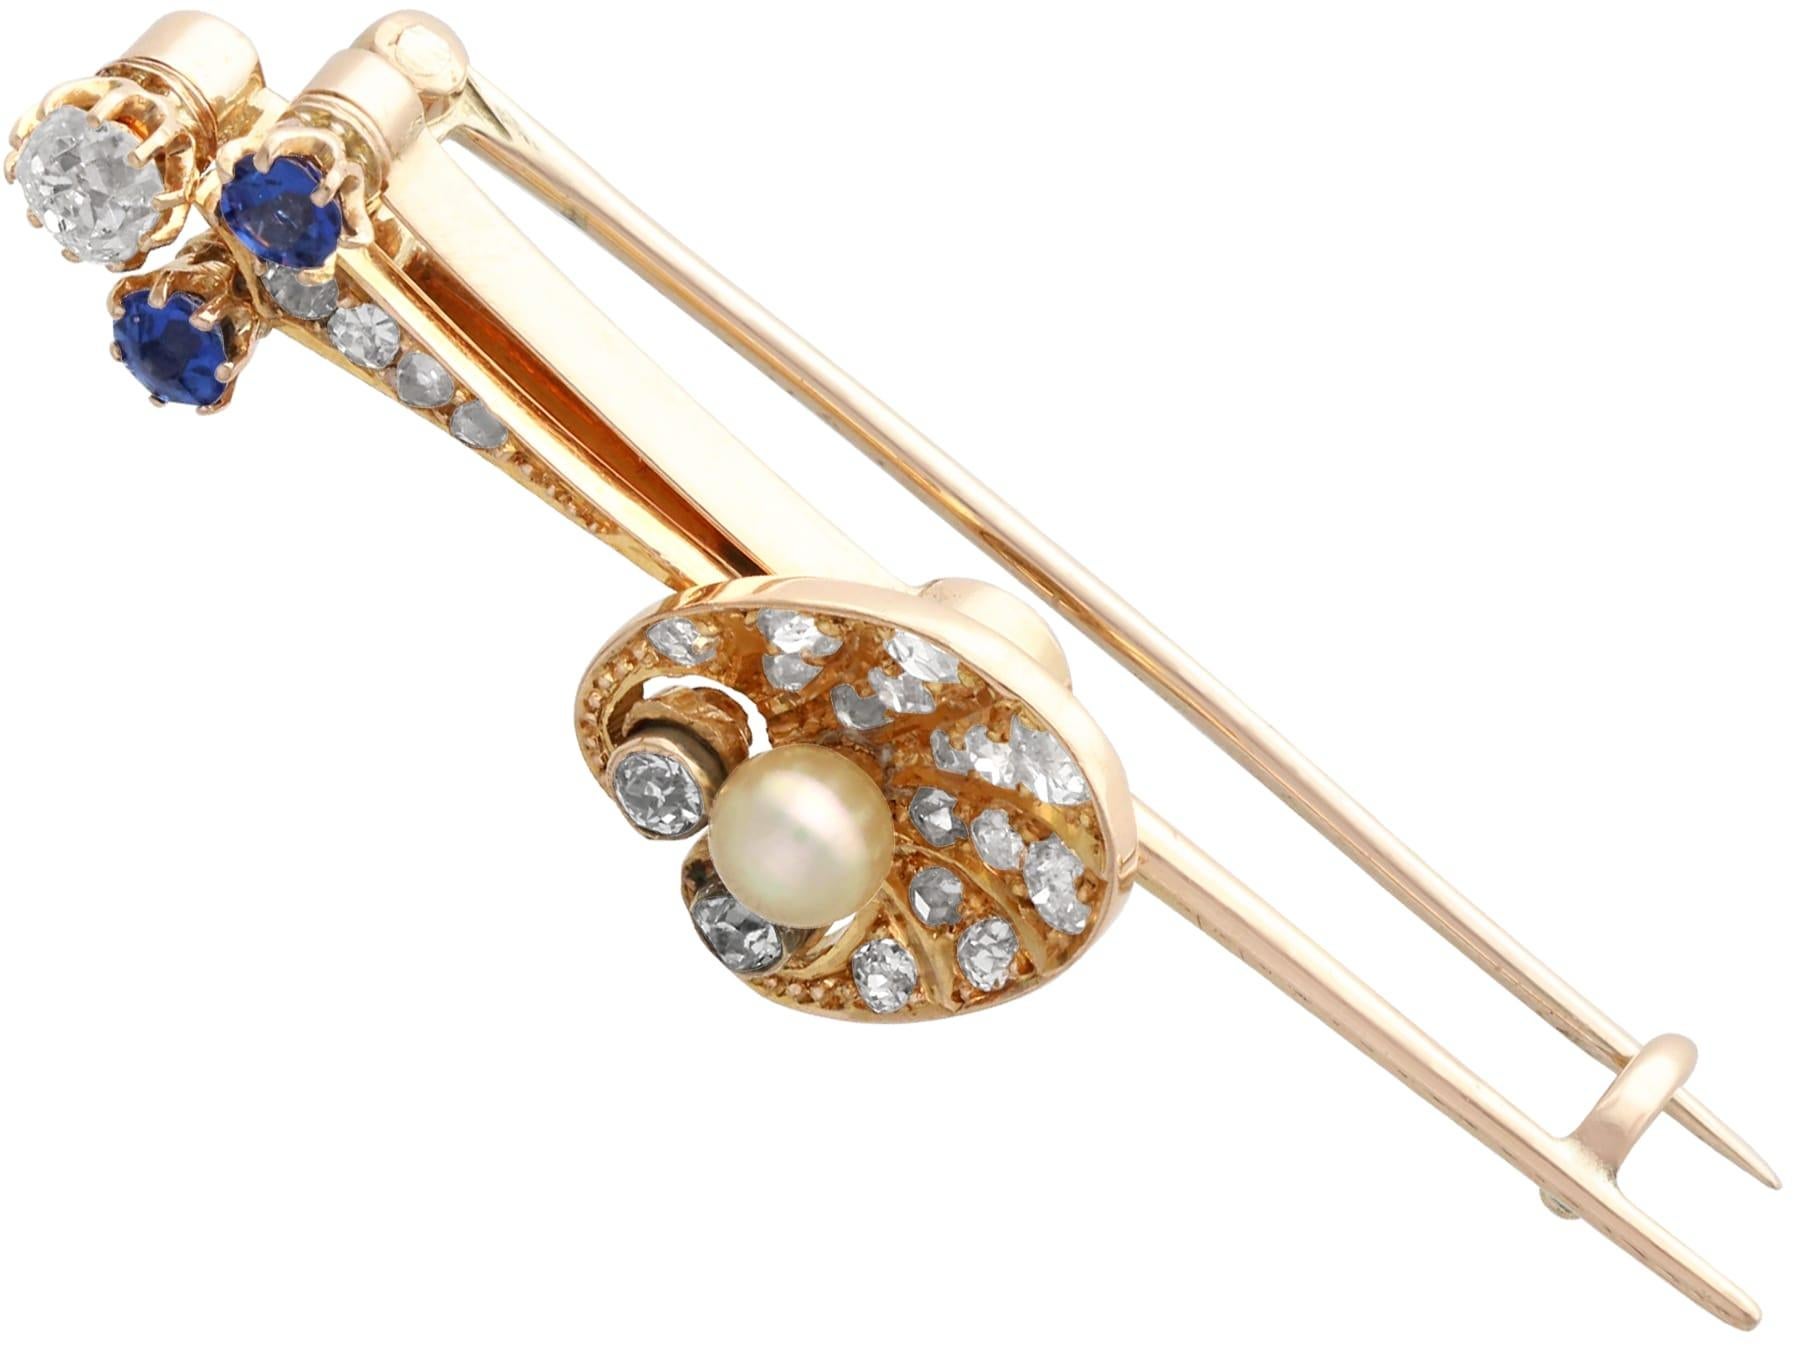 Antique Diamond, Sapphire, Pearl and 12k Yellow Gold Shell Bar Brooch Circa 1900 In Excellent Condition For Sale In Jesmond, Newcastle Upon Tyne